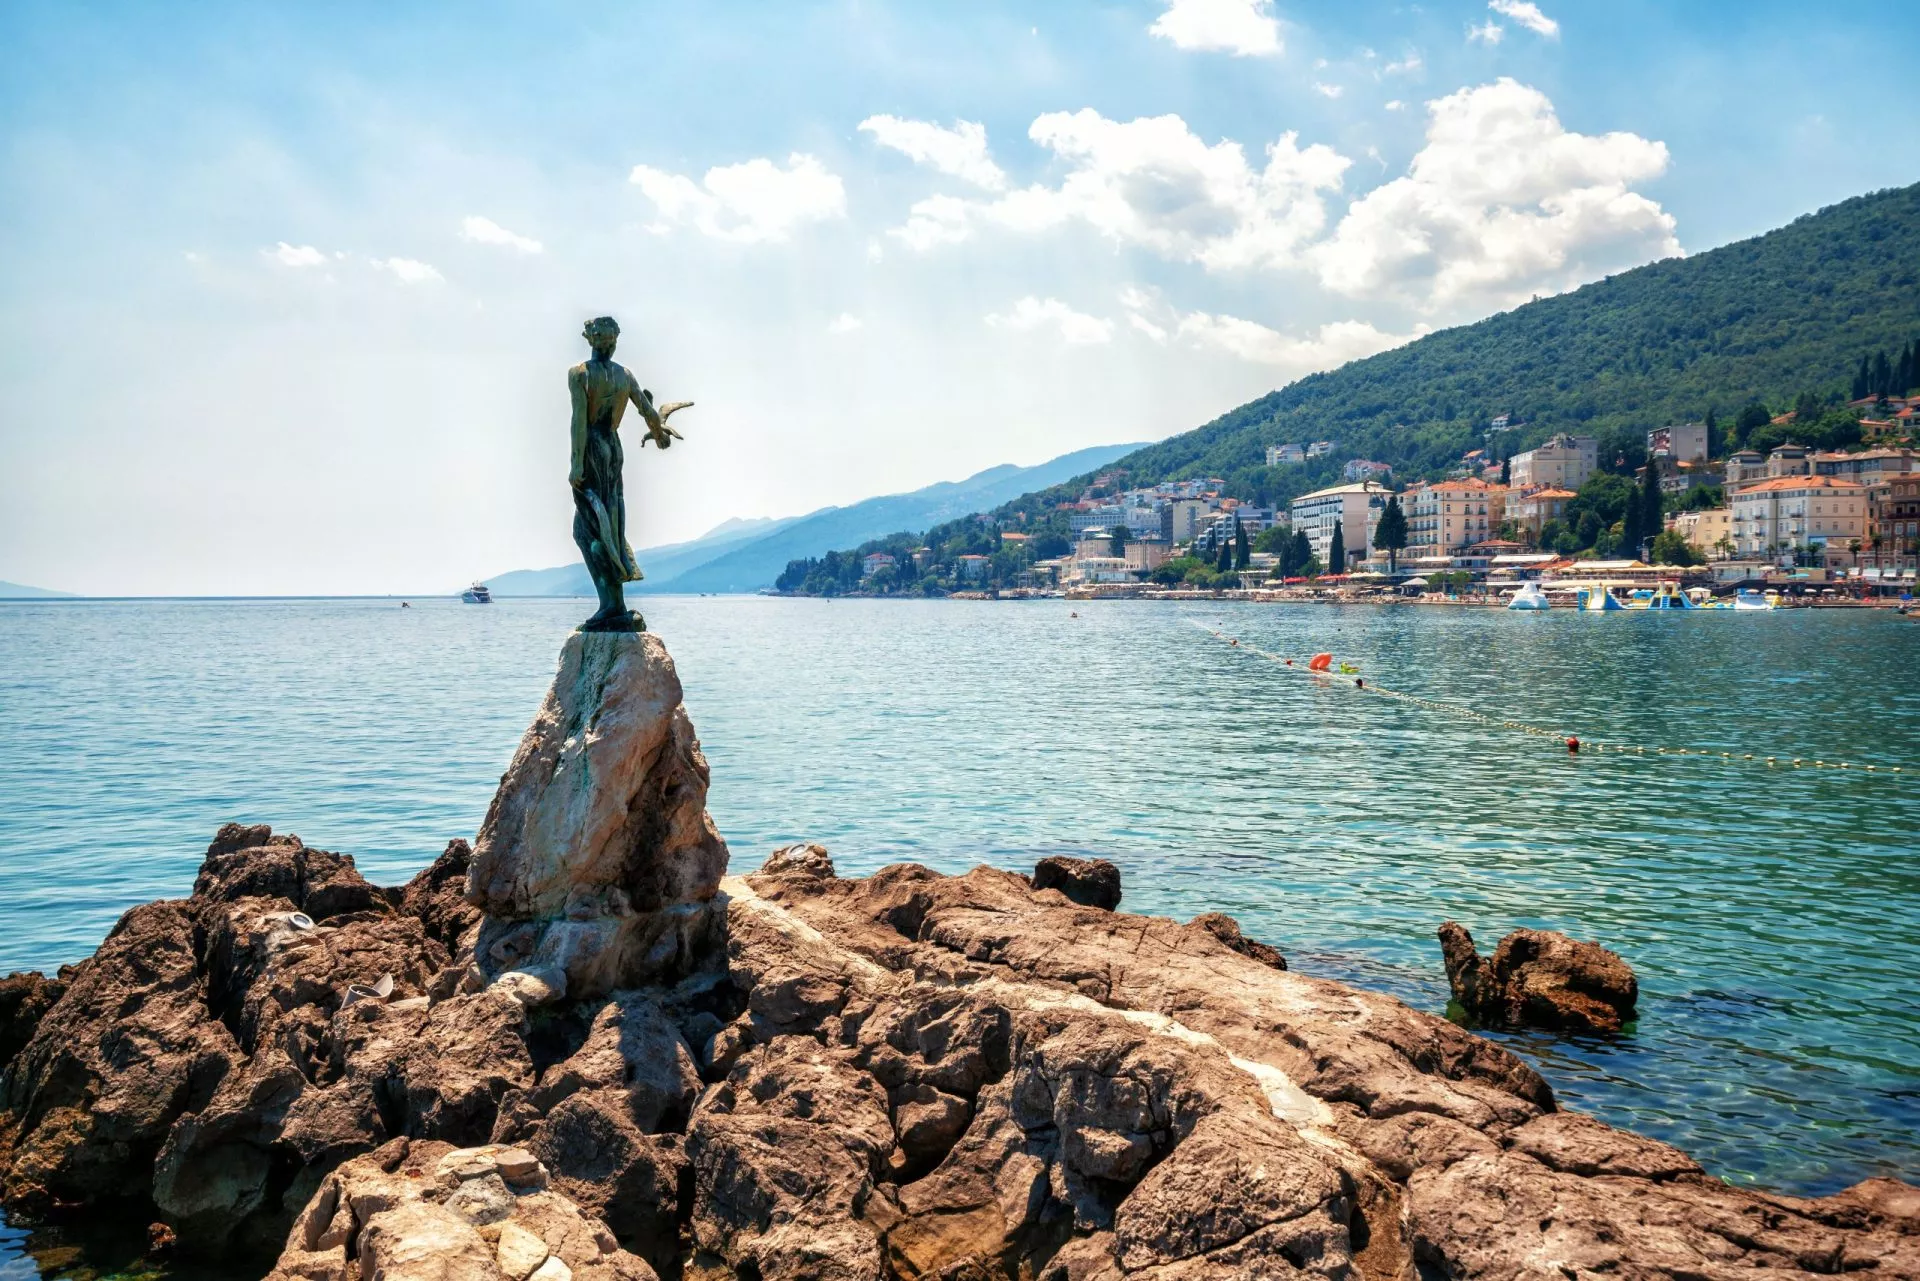 The historic statue of Maiden with the seagull is a symbol, not only of Opatija, but the entire Kvarner region. The statue on Adriatic coast is in the touristic town of Opatija in Croatia, Europe